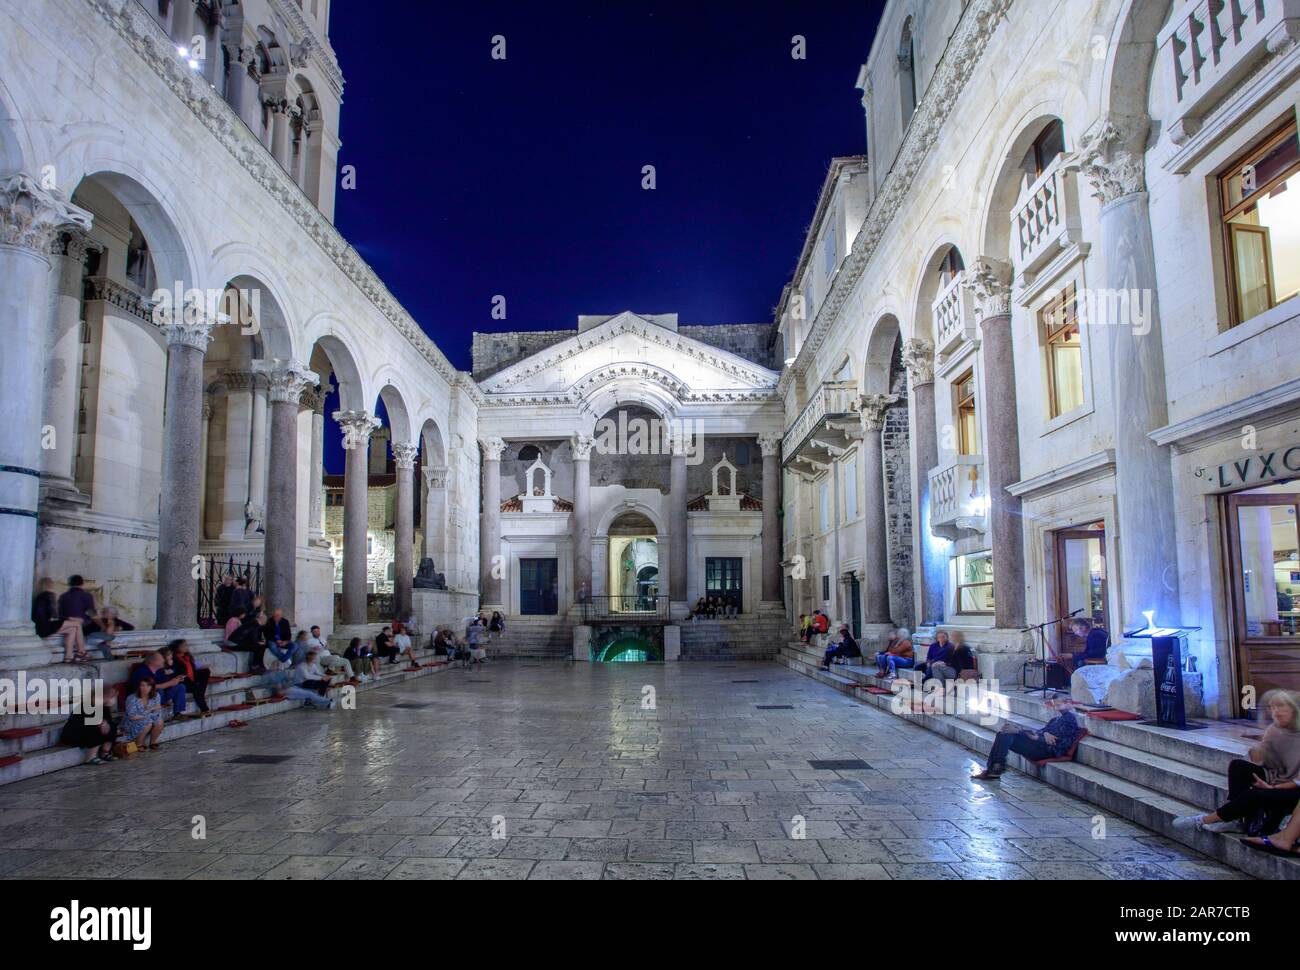 People listen to music in the Diocletian Palace, Split. Croatia Stock Photo